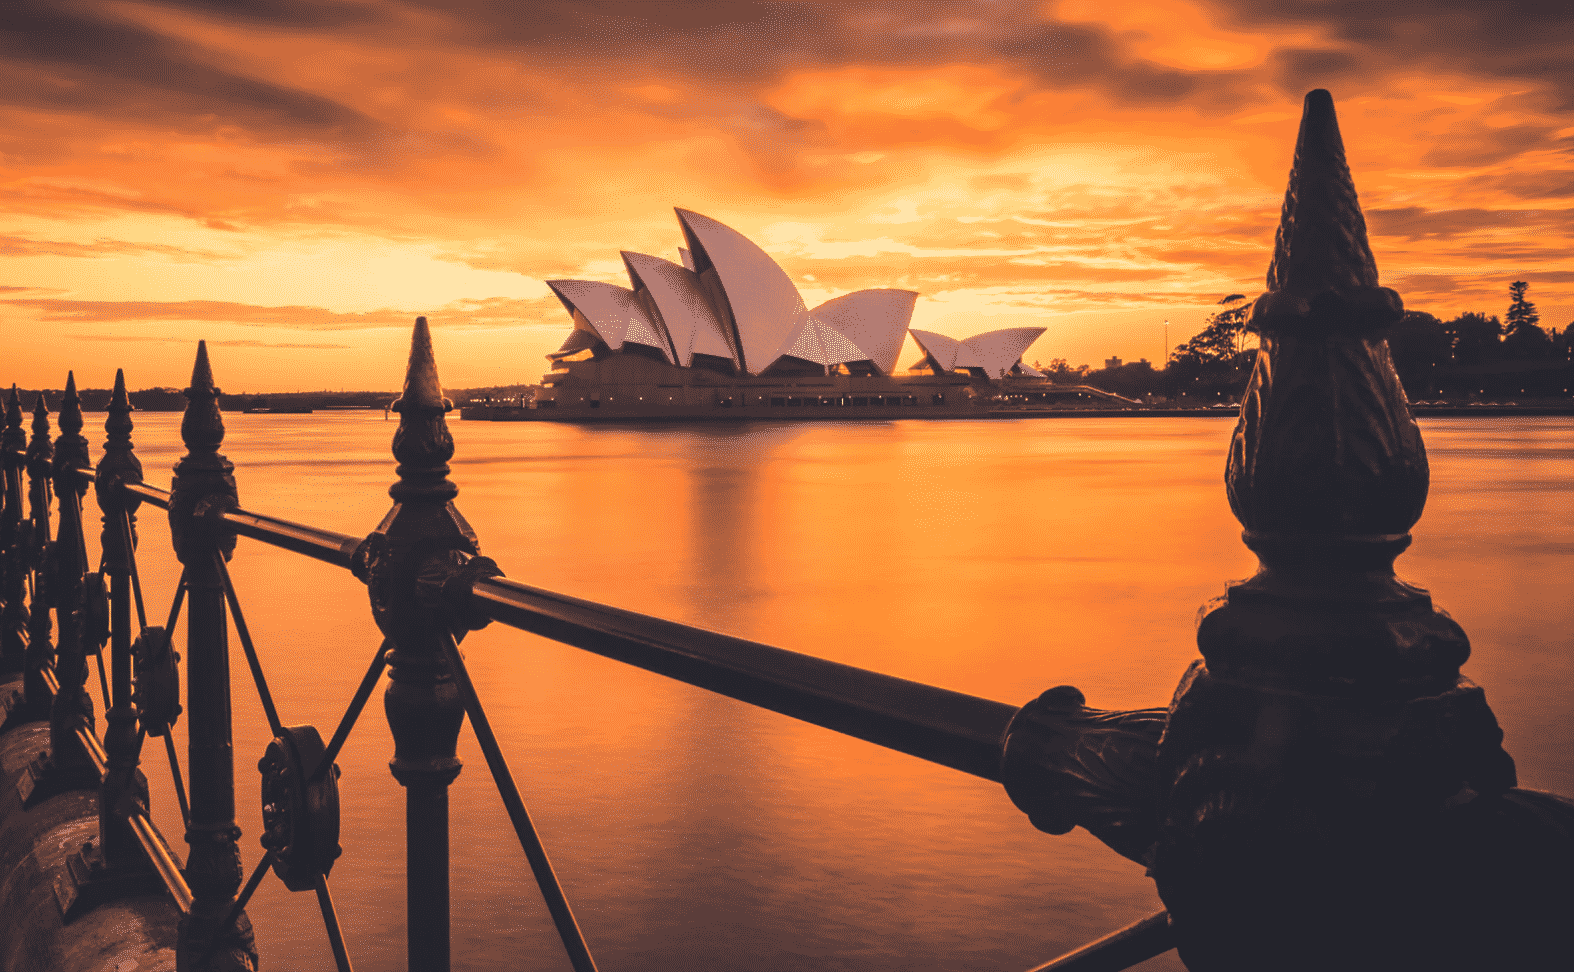 Things to do in Australasia